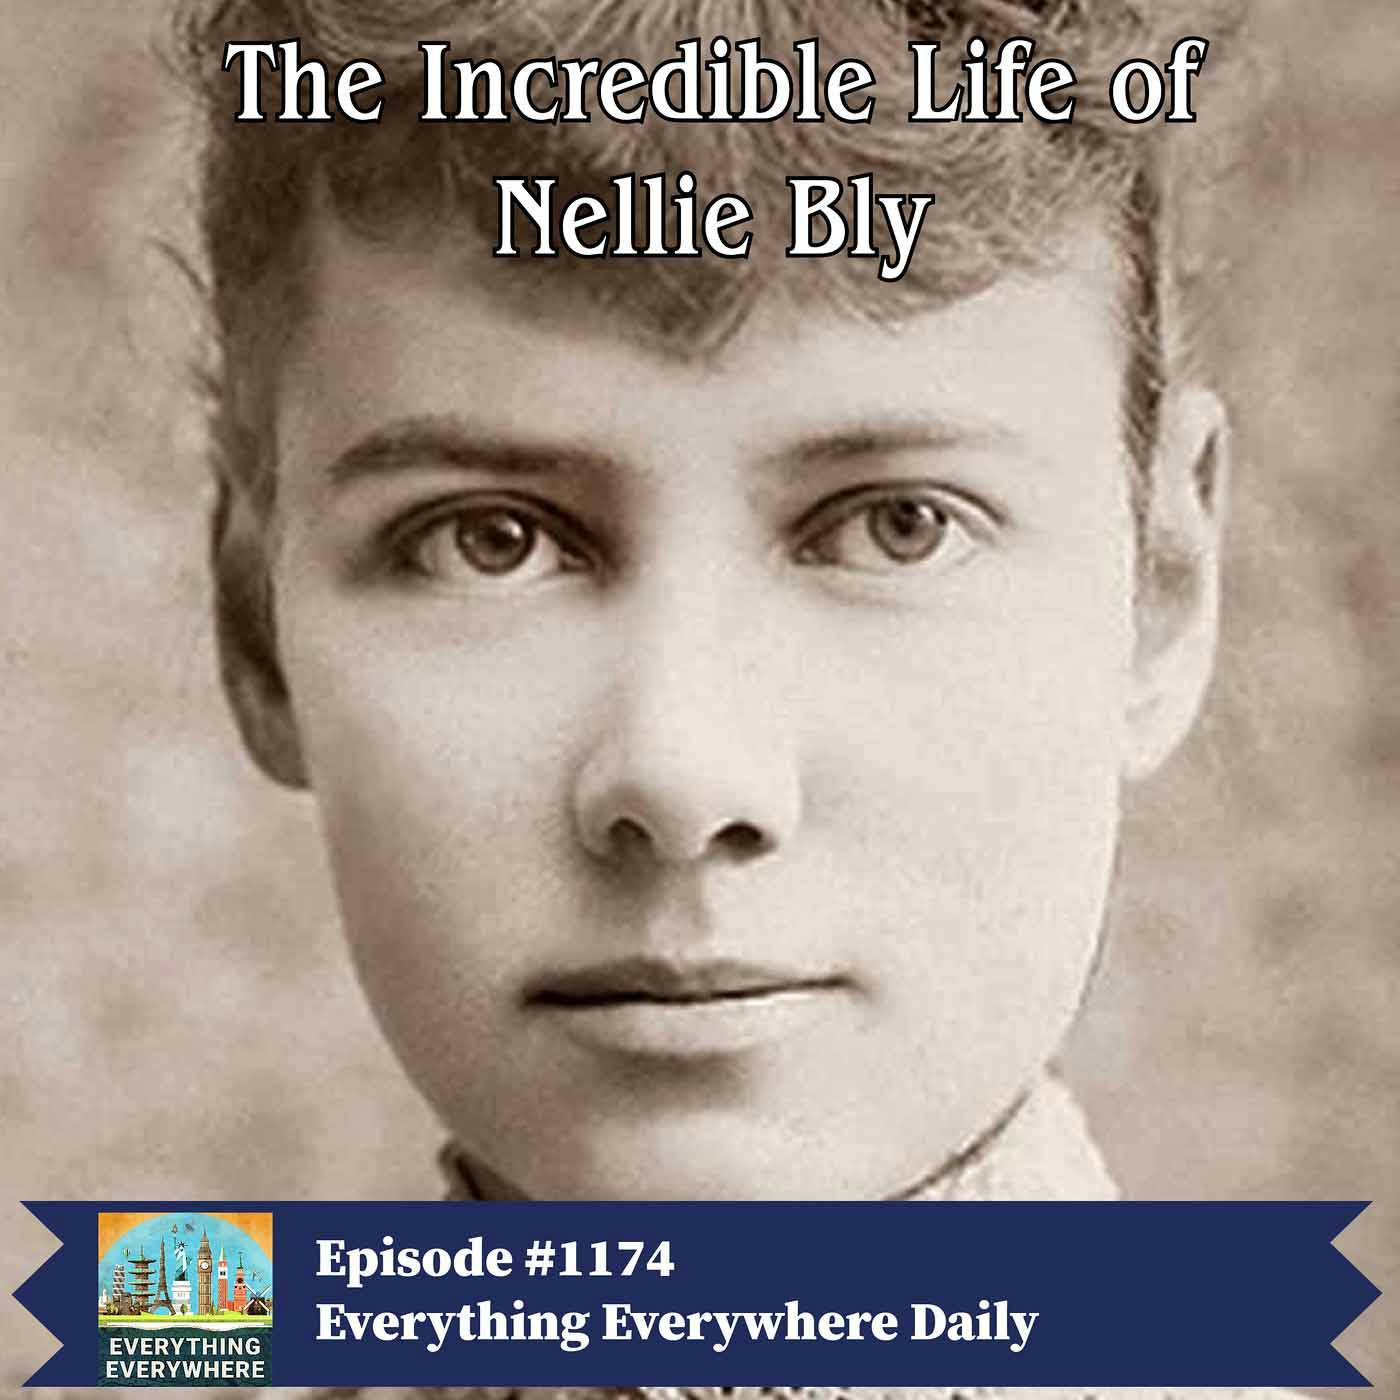 The Incredible Life of Nellie Bly